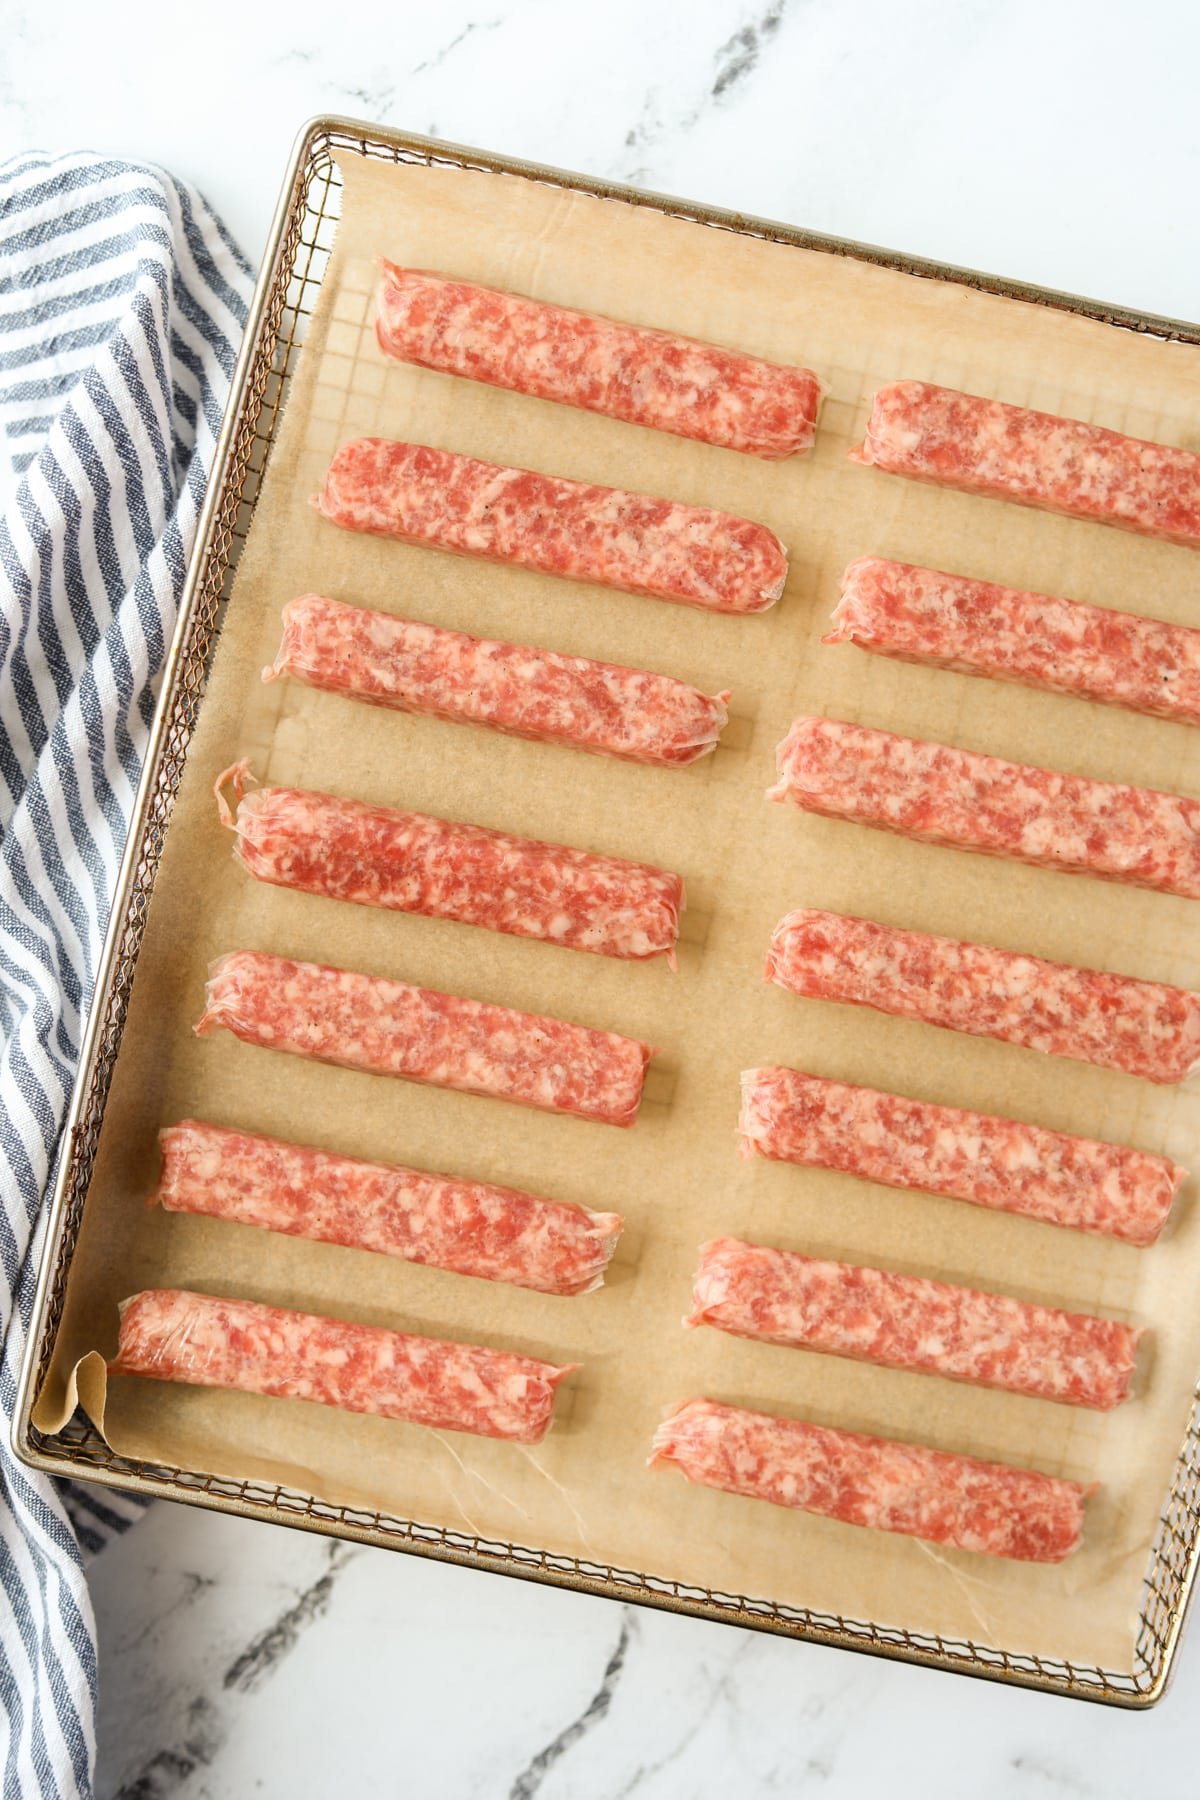 An air fryer tray filled with raw sausage links.